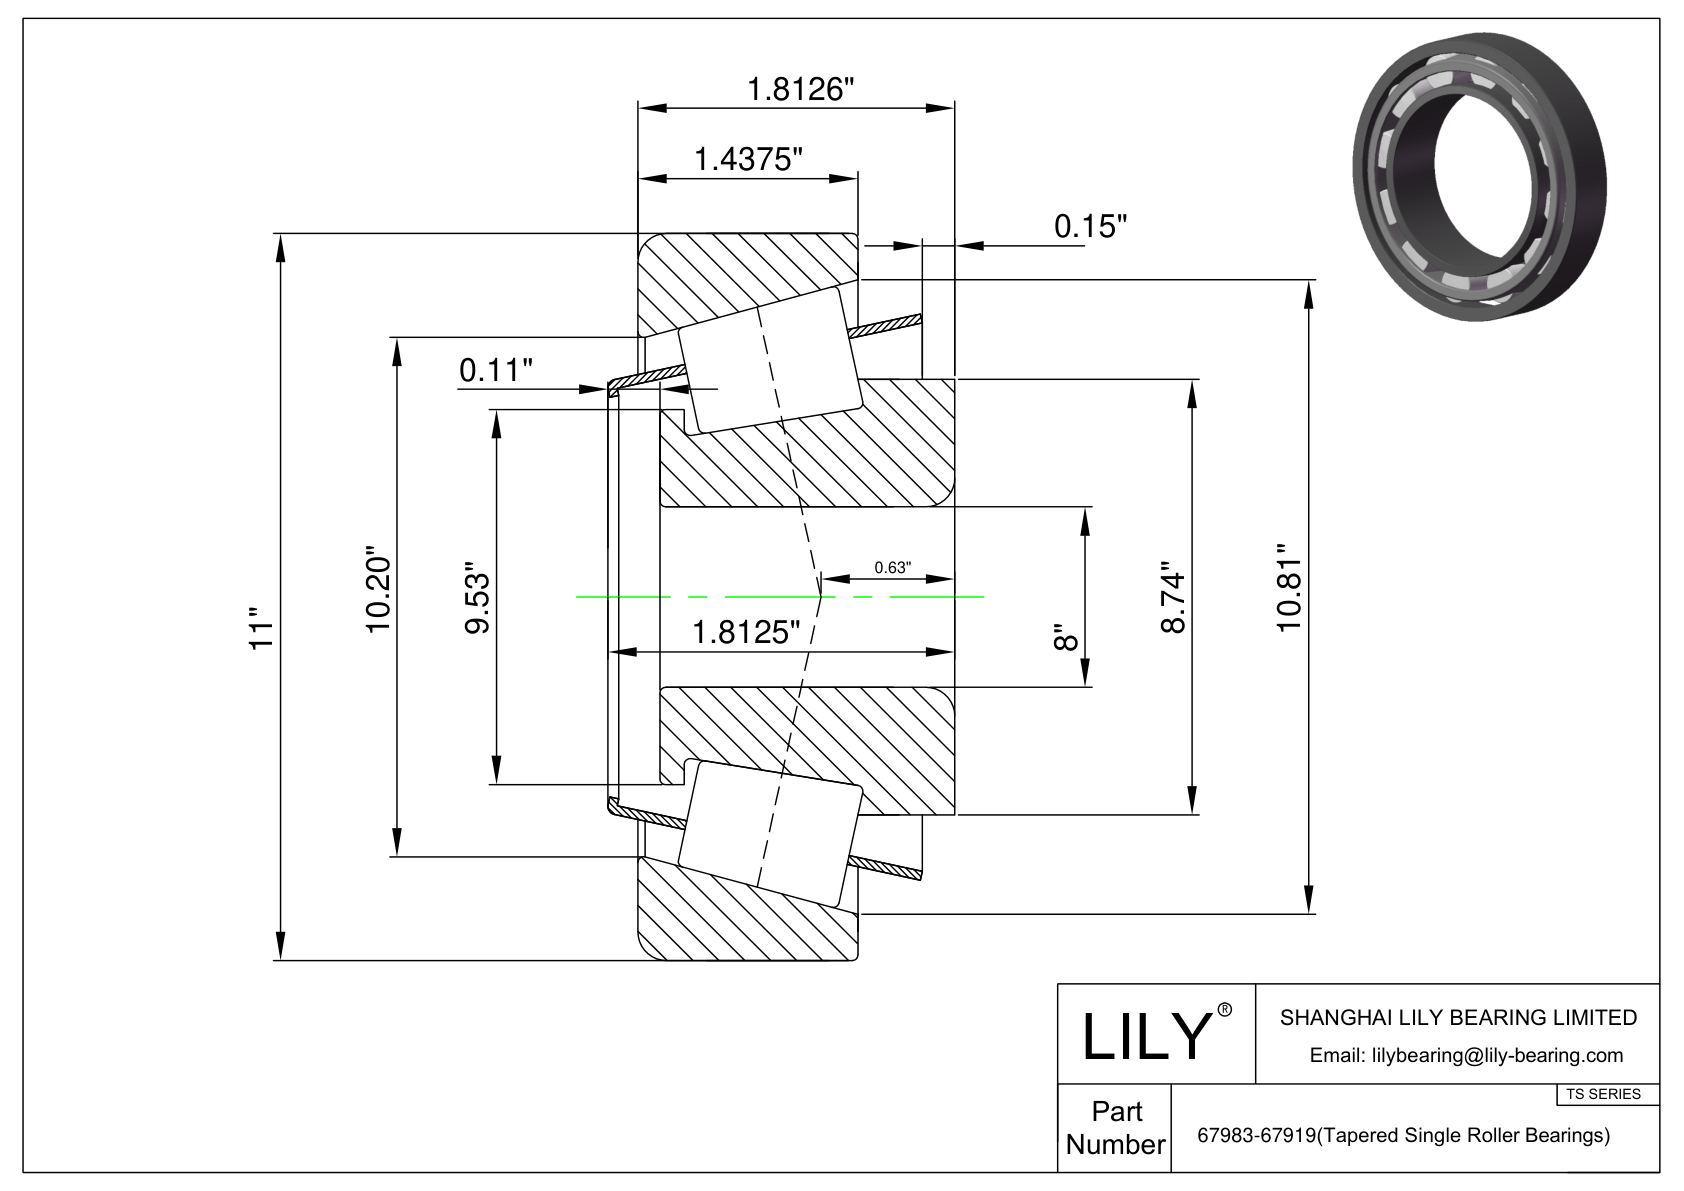 67983-67919 TS (Tapered Single Roller Bearings) (Imperial) cad drawing